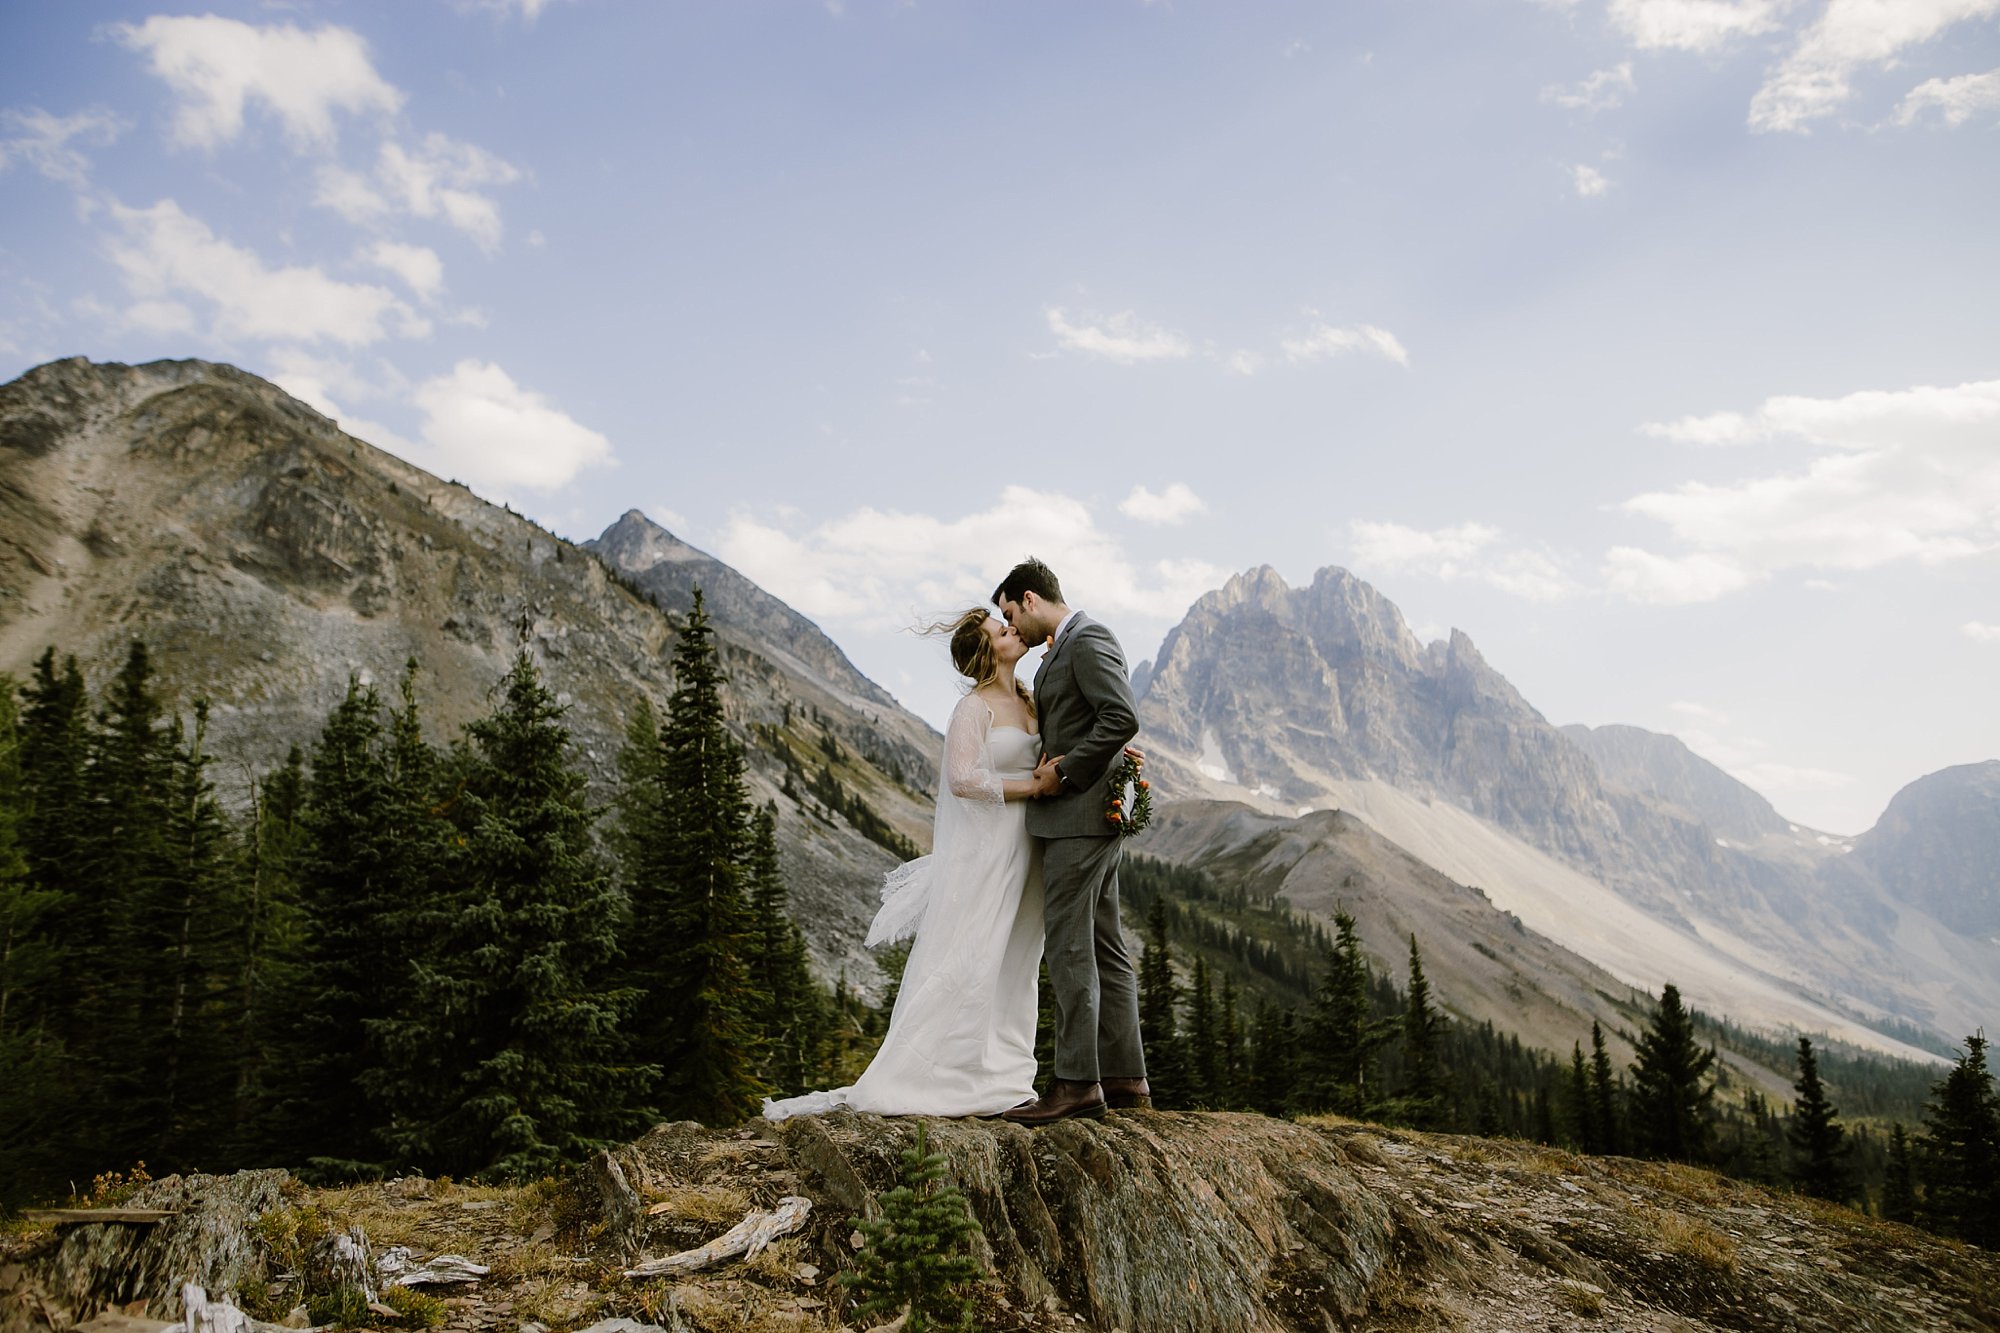 A bride and groom kiss during their helicopter adventure wedding